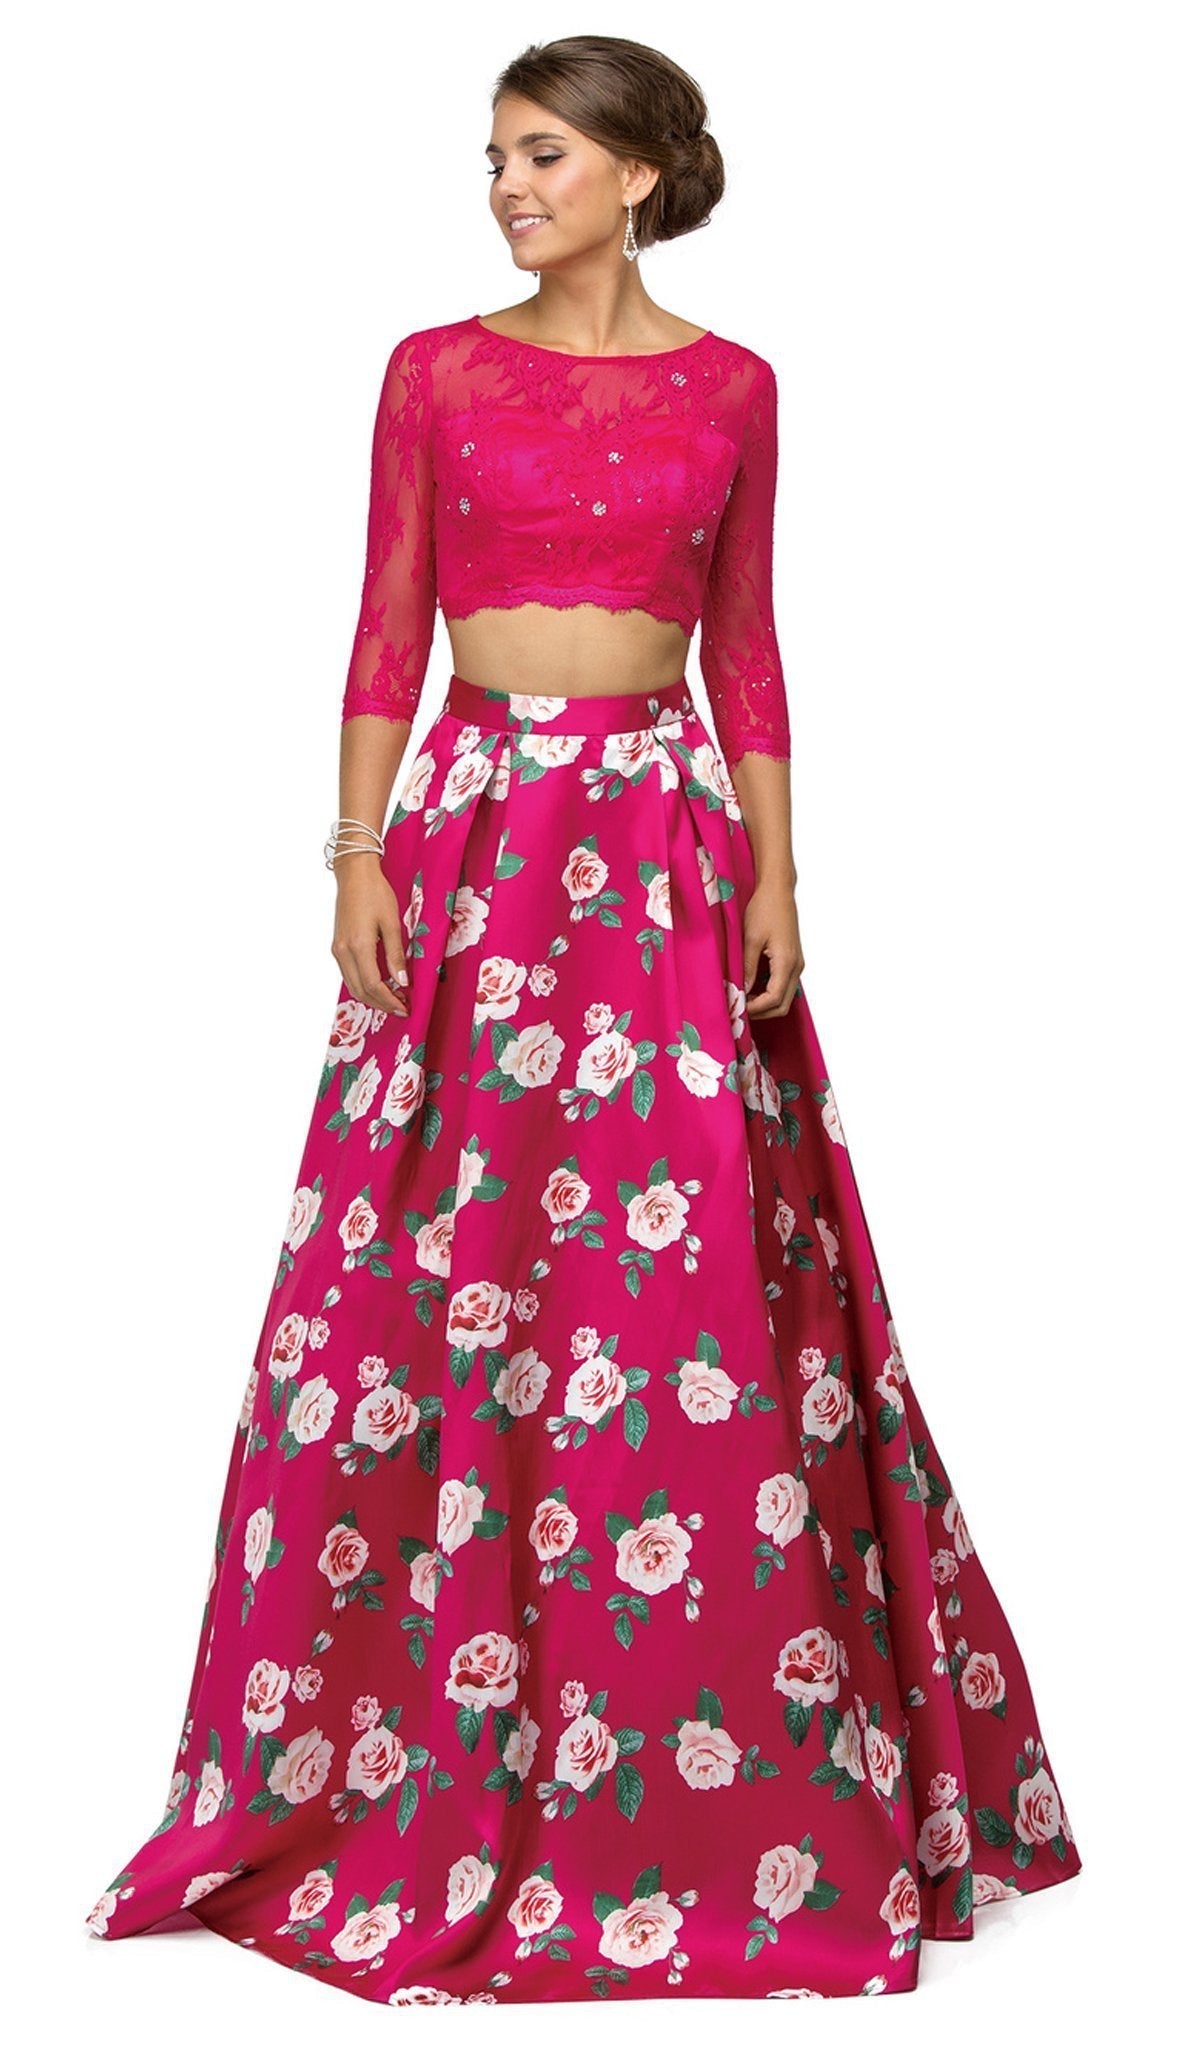 Dancing Queen - 9452 Embellished Two Piece  Floral Print Prom Dress Special Occasion Dress XS / Fuchsia/Fuchsia Print